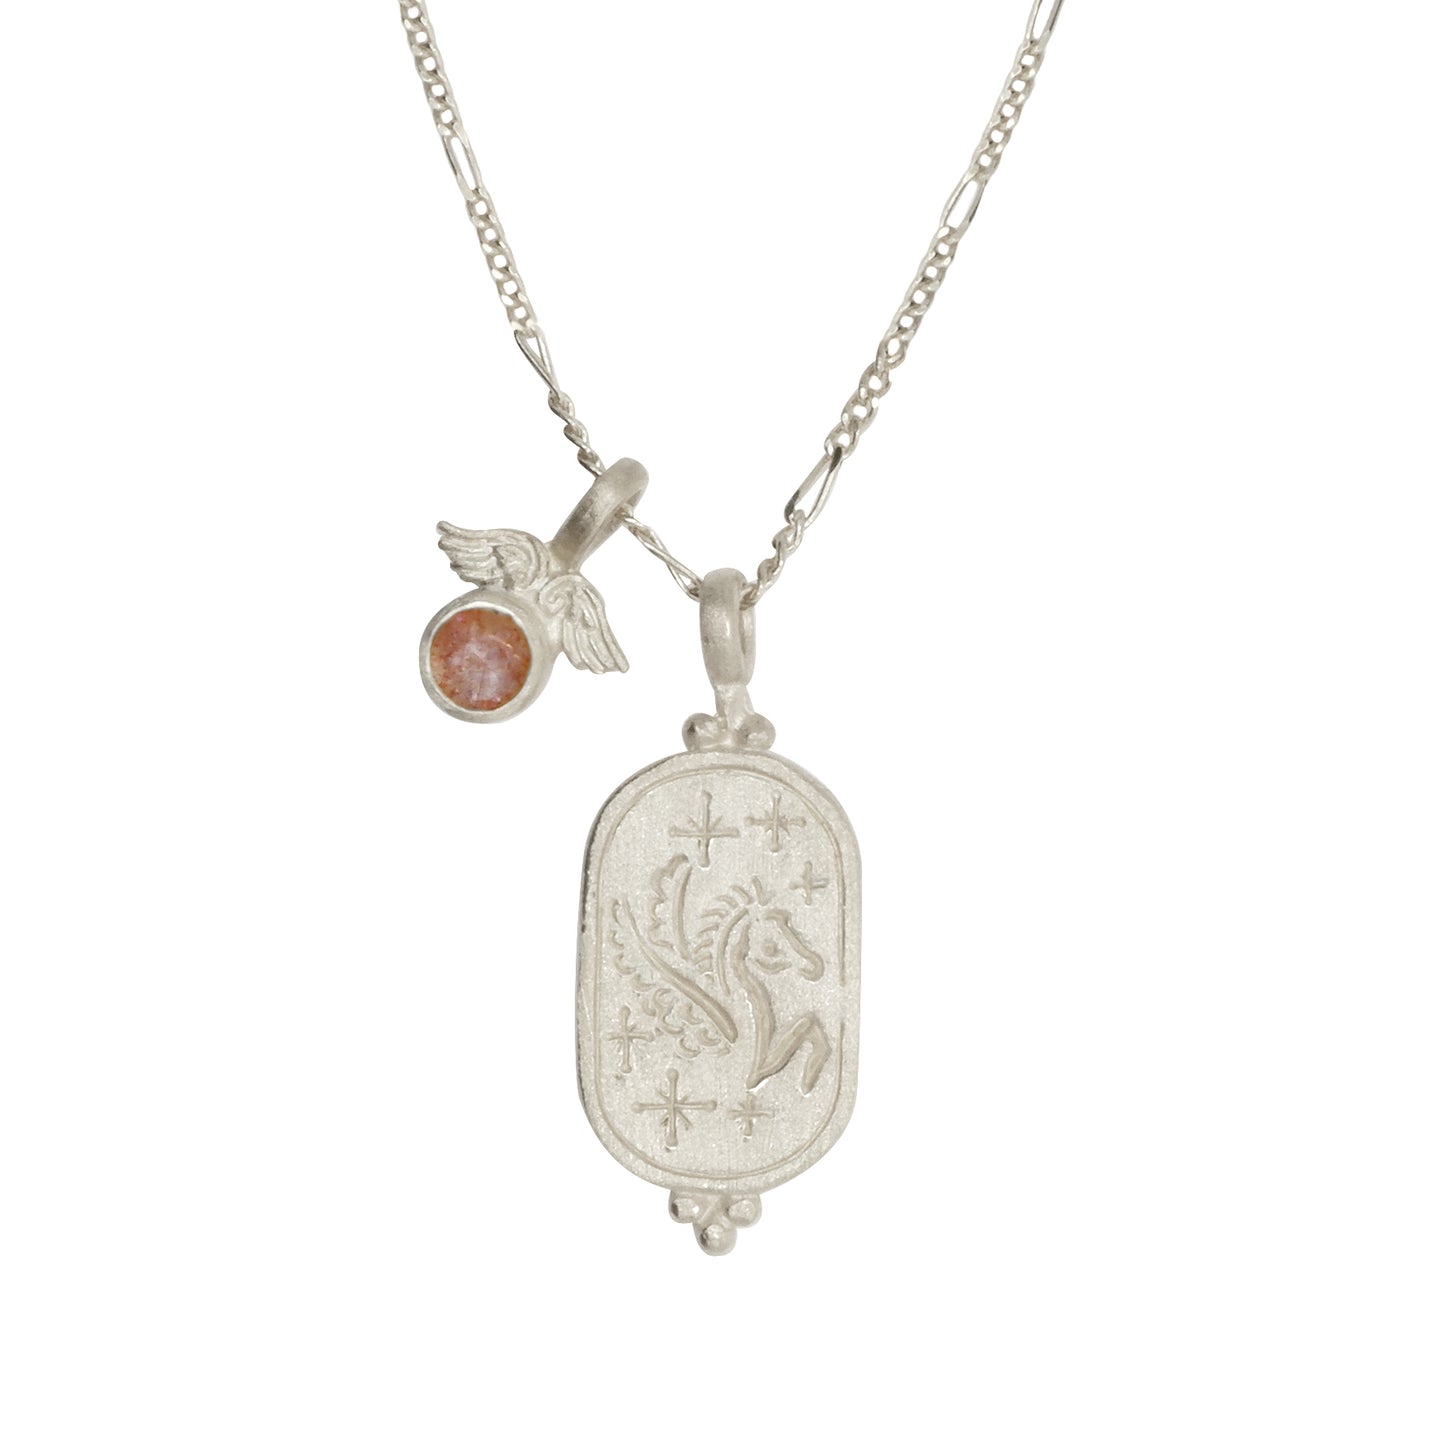 Hunt Of Hounds Pegasus Necklace. Coin pendant necklace with pegasus and stars. Sunstone charm with wings.